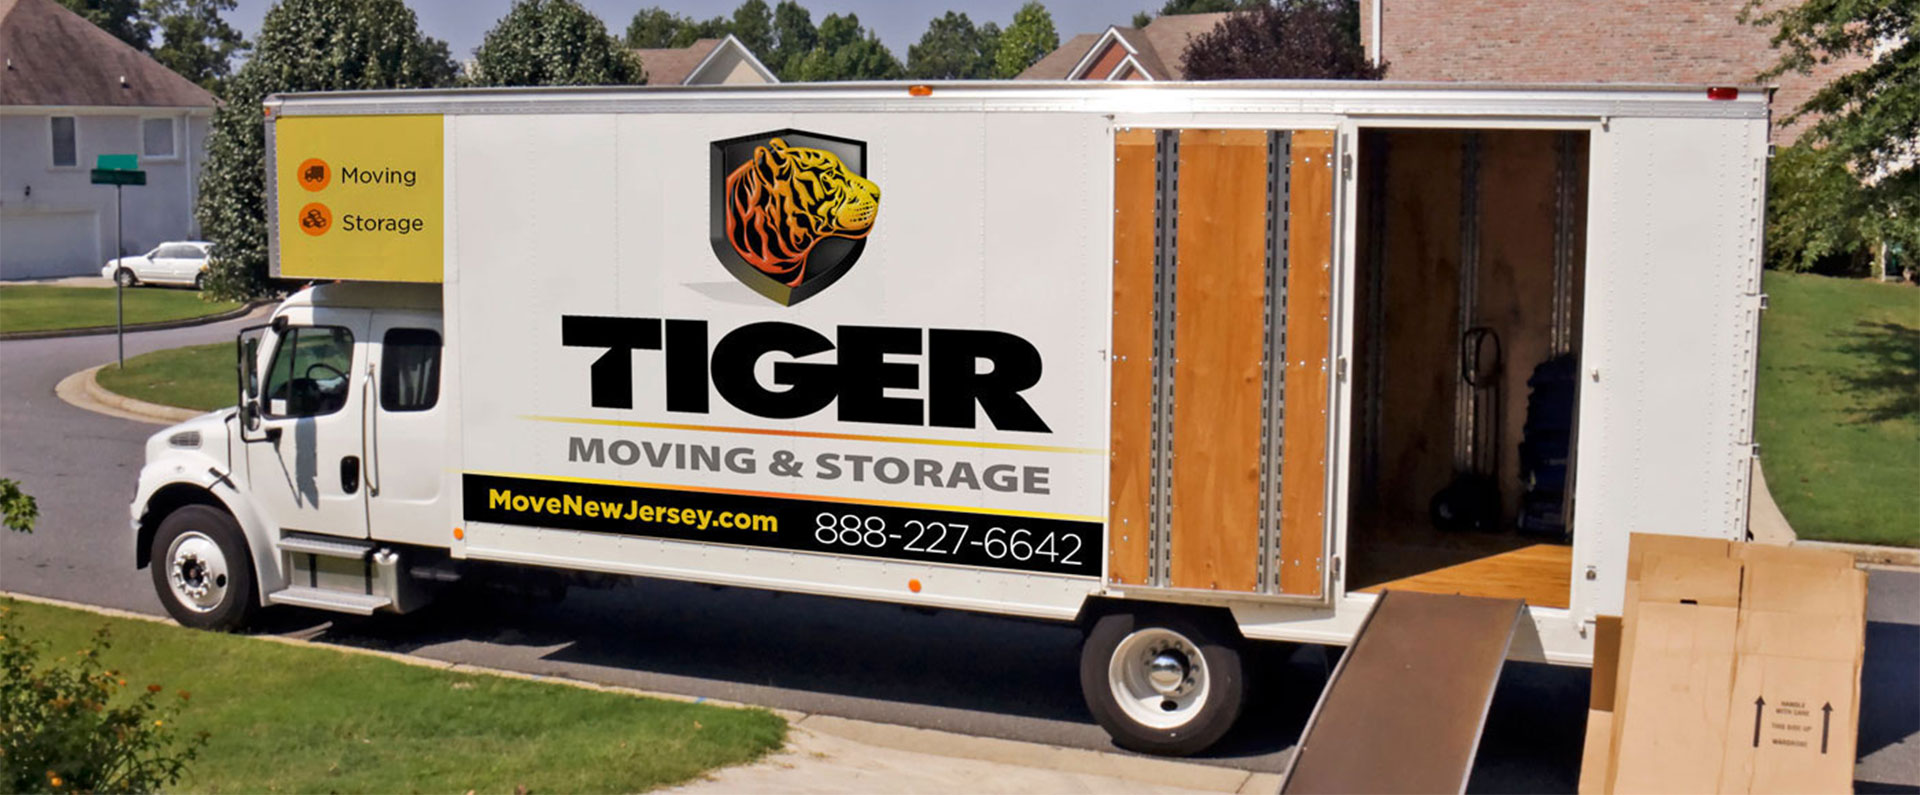 Jersey City Movers Tiger Moving Amp Storage Makes It Simple